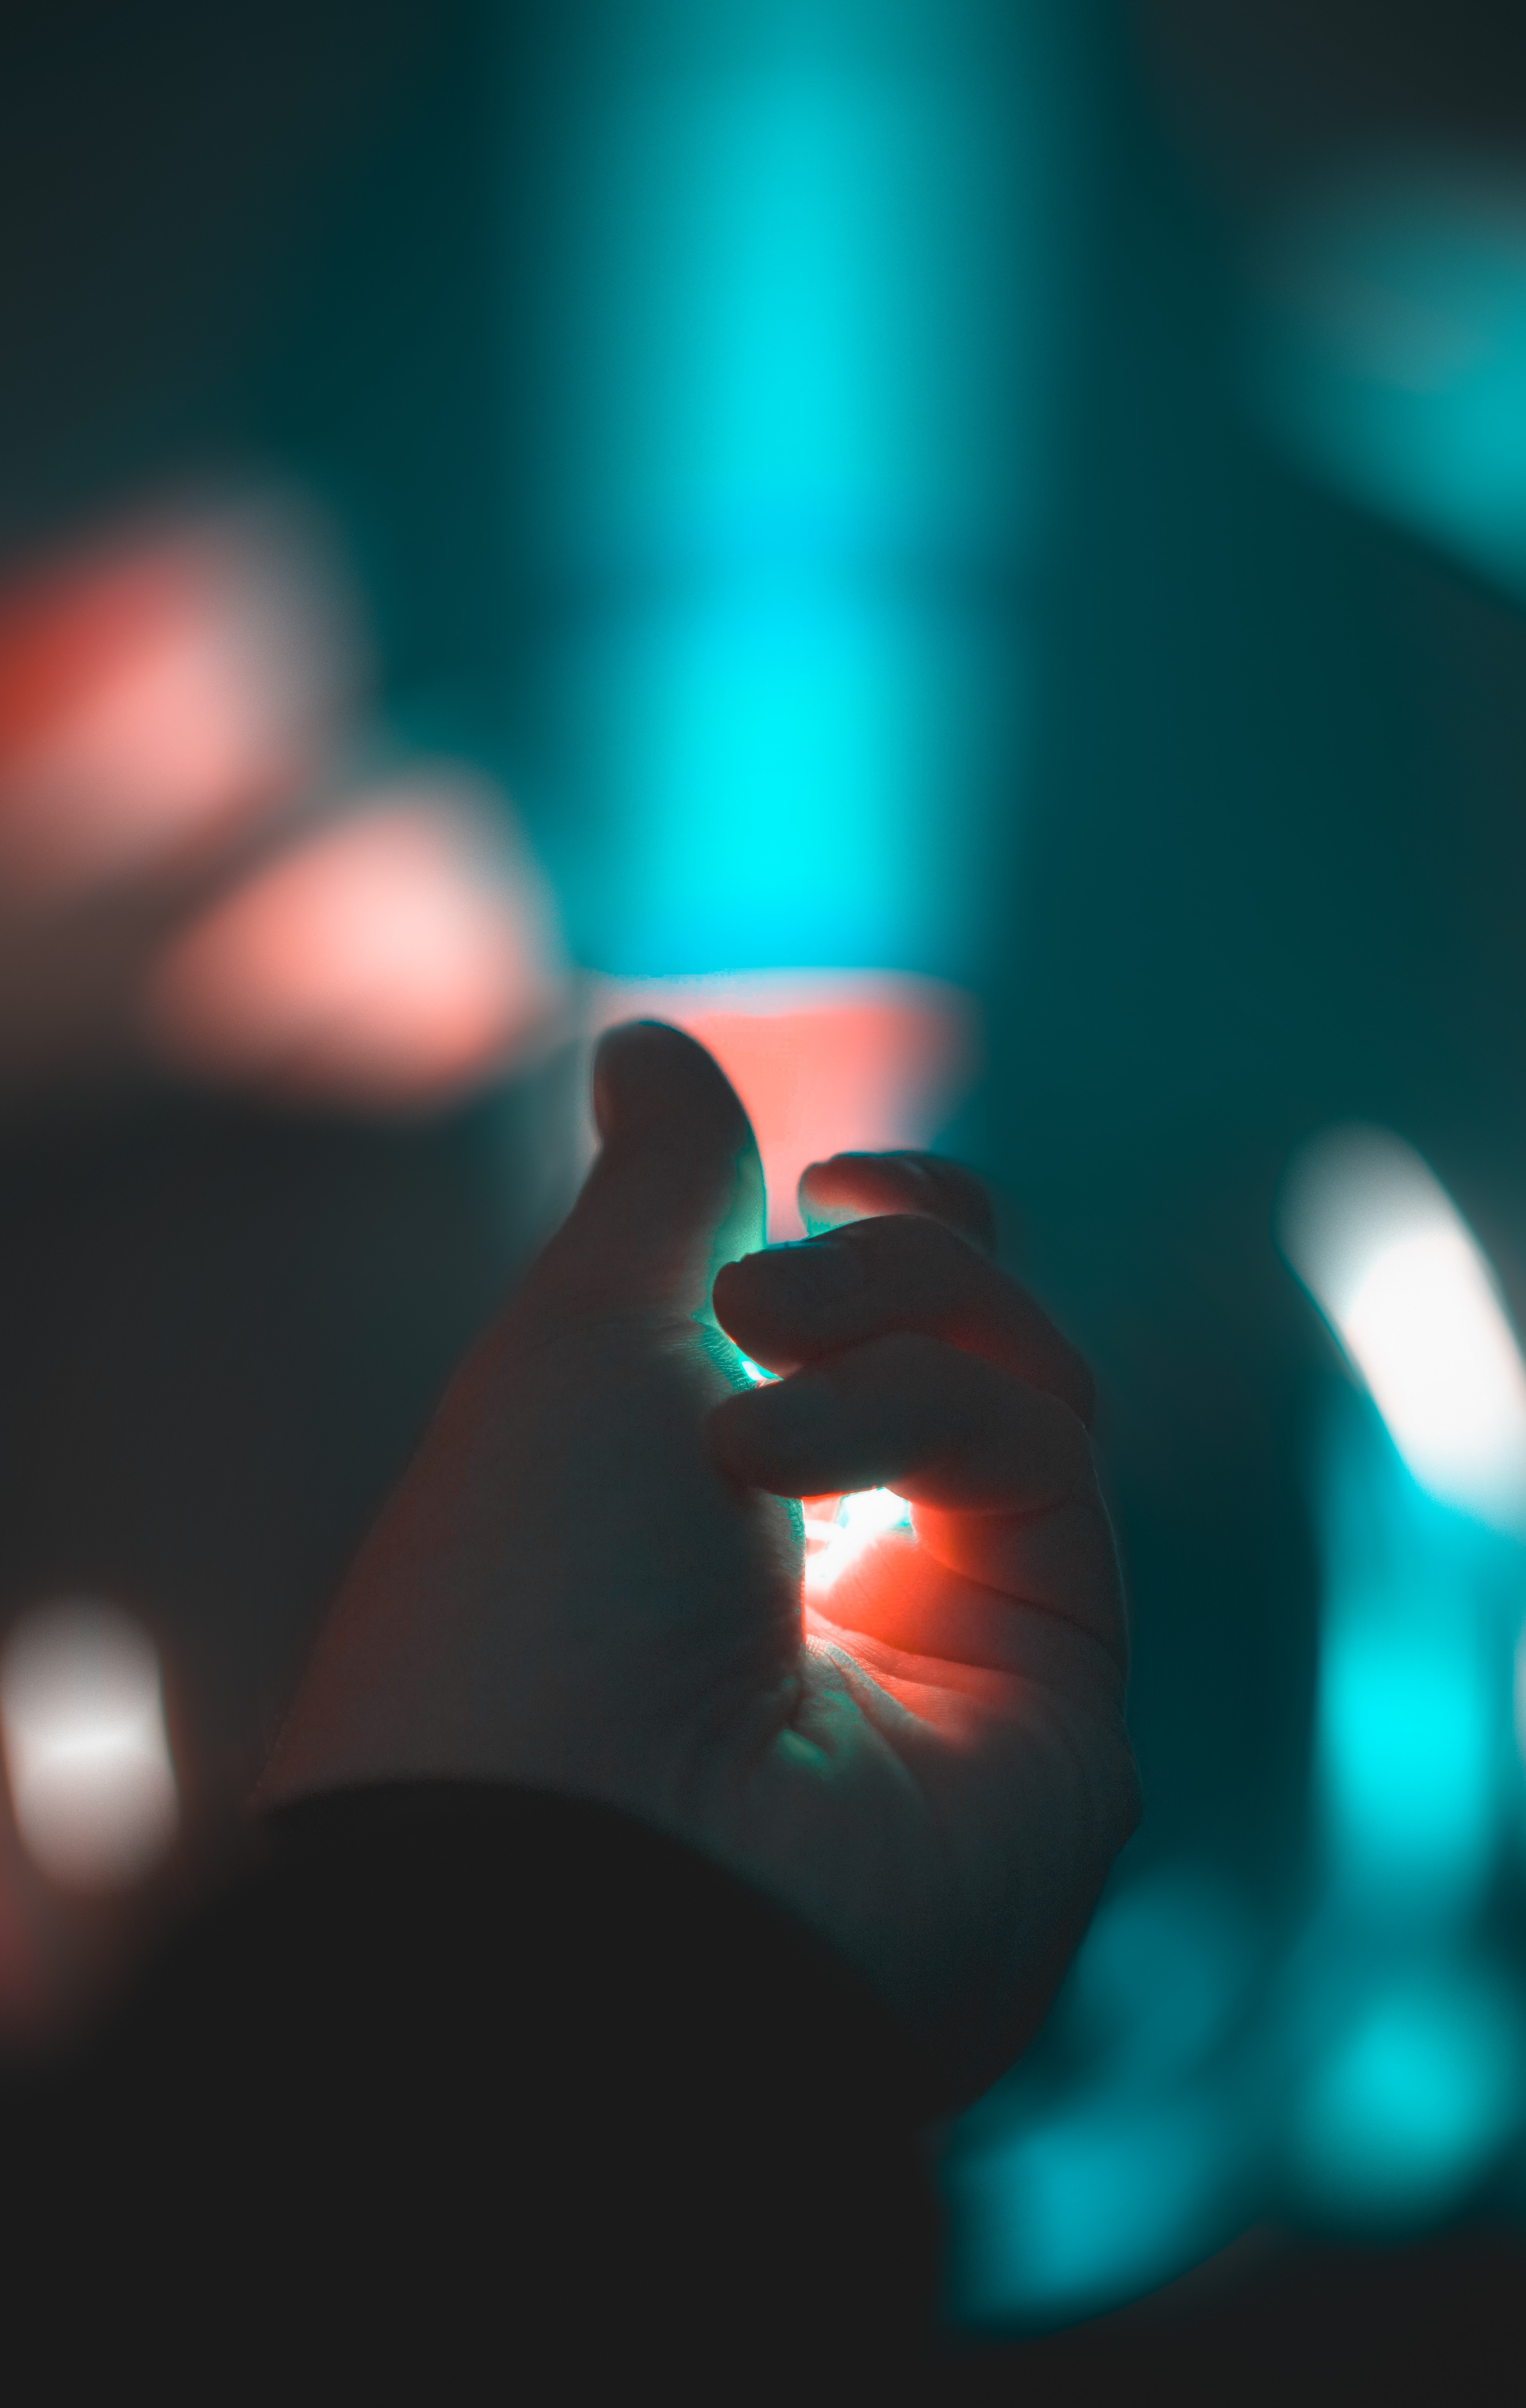 dark, hand, miscellanea, miscellaneous, blur, smooth, fingers for android